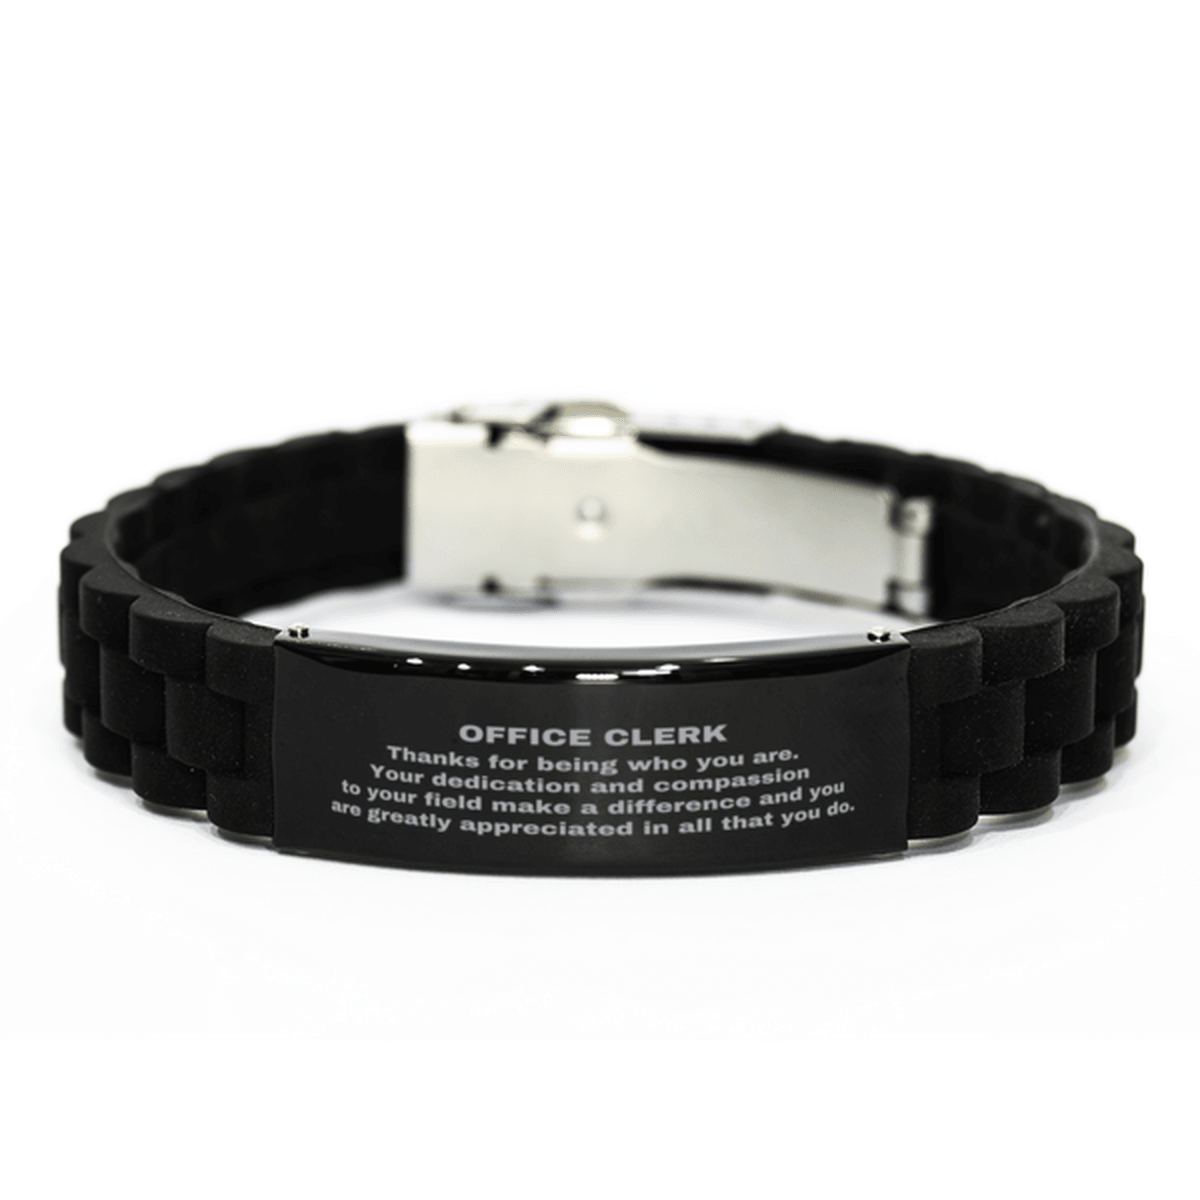 Office Clerk Black Glidelock Clasp Engraved Bracelet - Thanks for being who you are - Birthday Christmas Jewelry Gifts Coworkers Colleague Boss